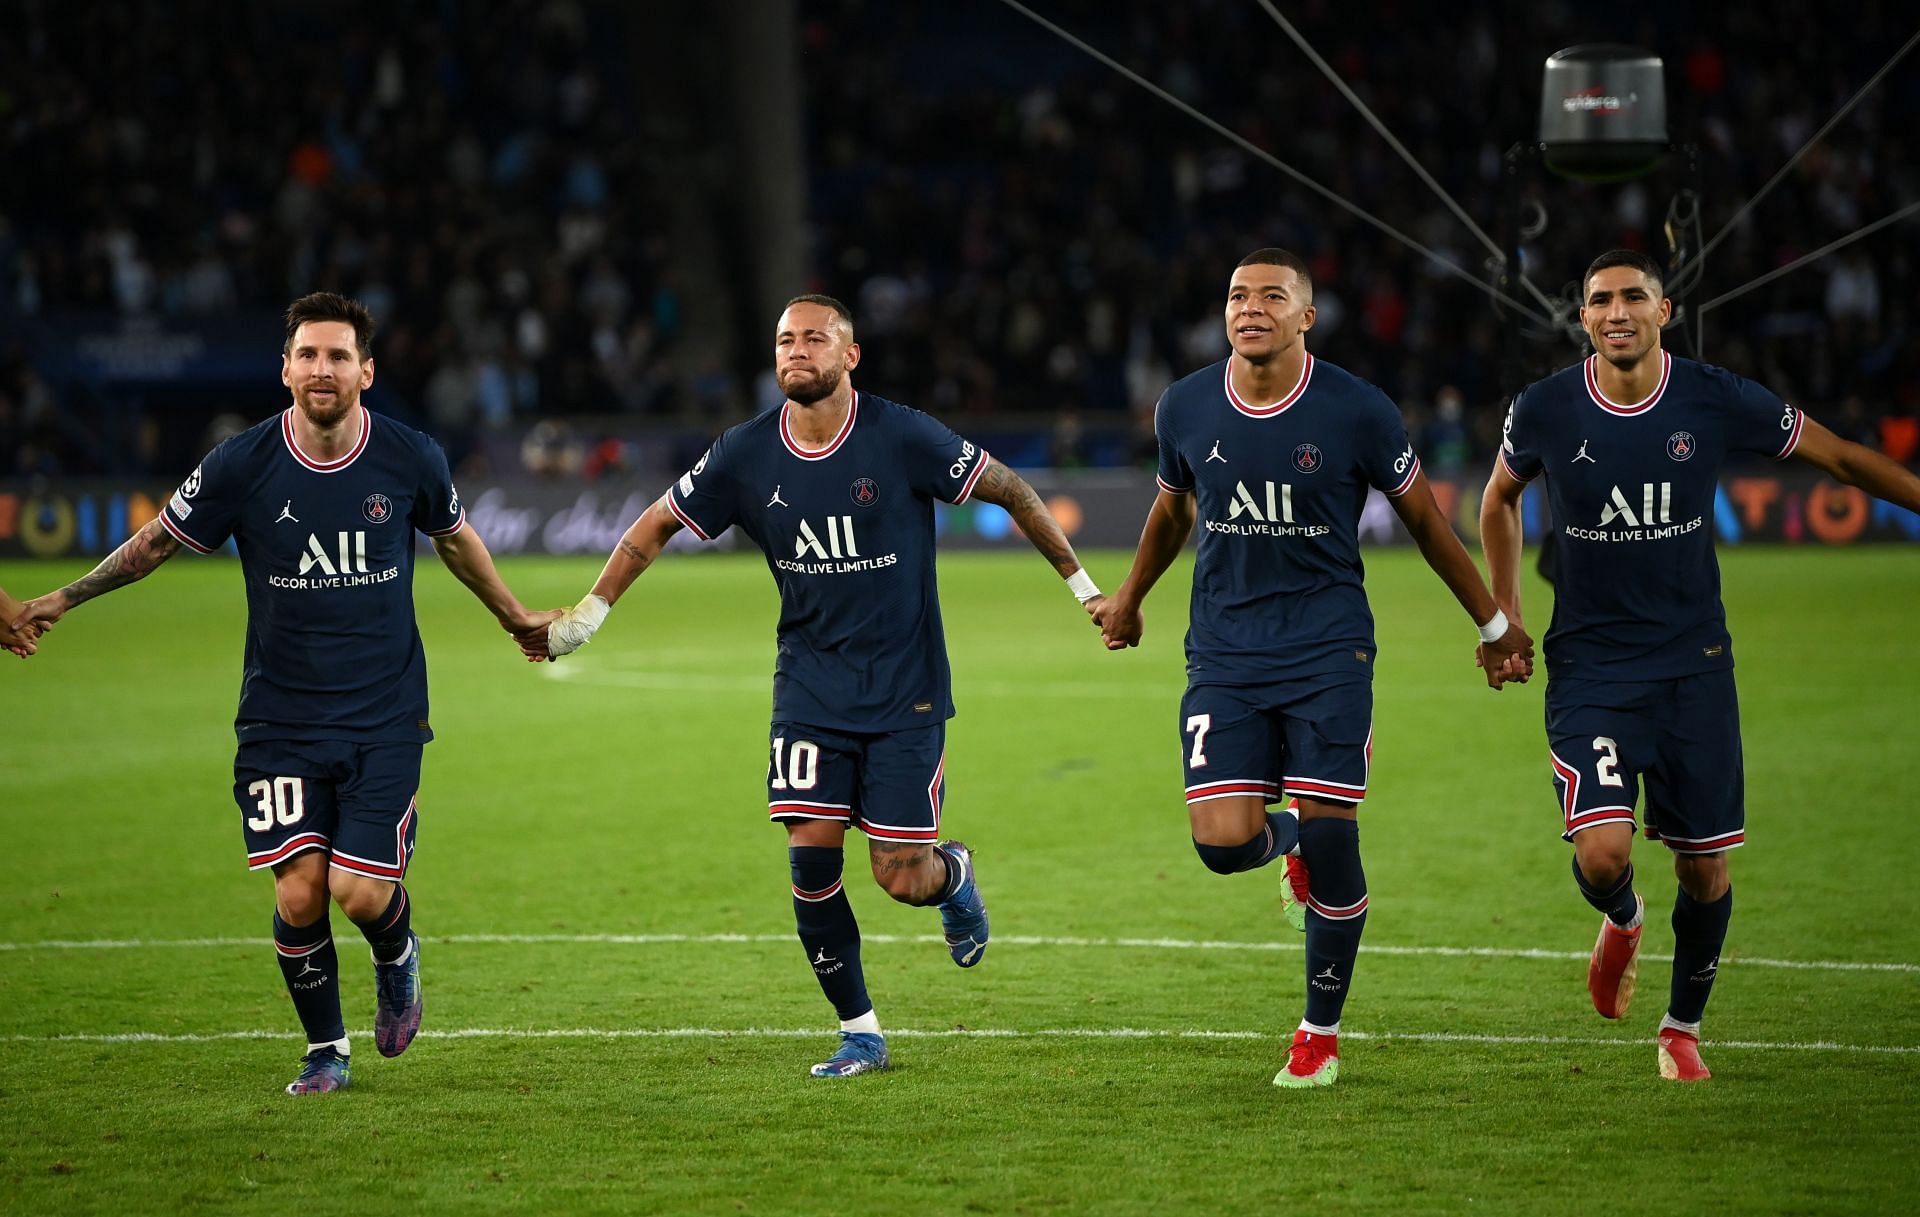 PSG have been unbeaten in their last few games across competitions.